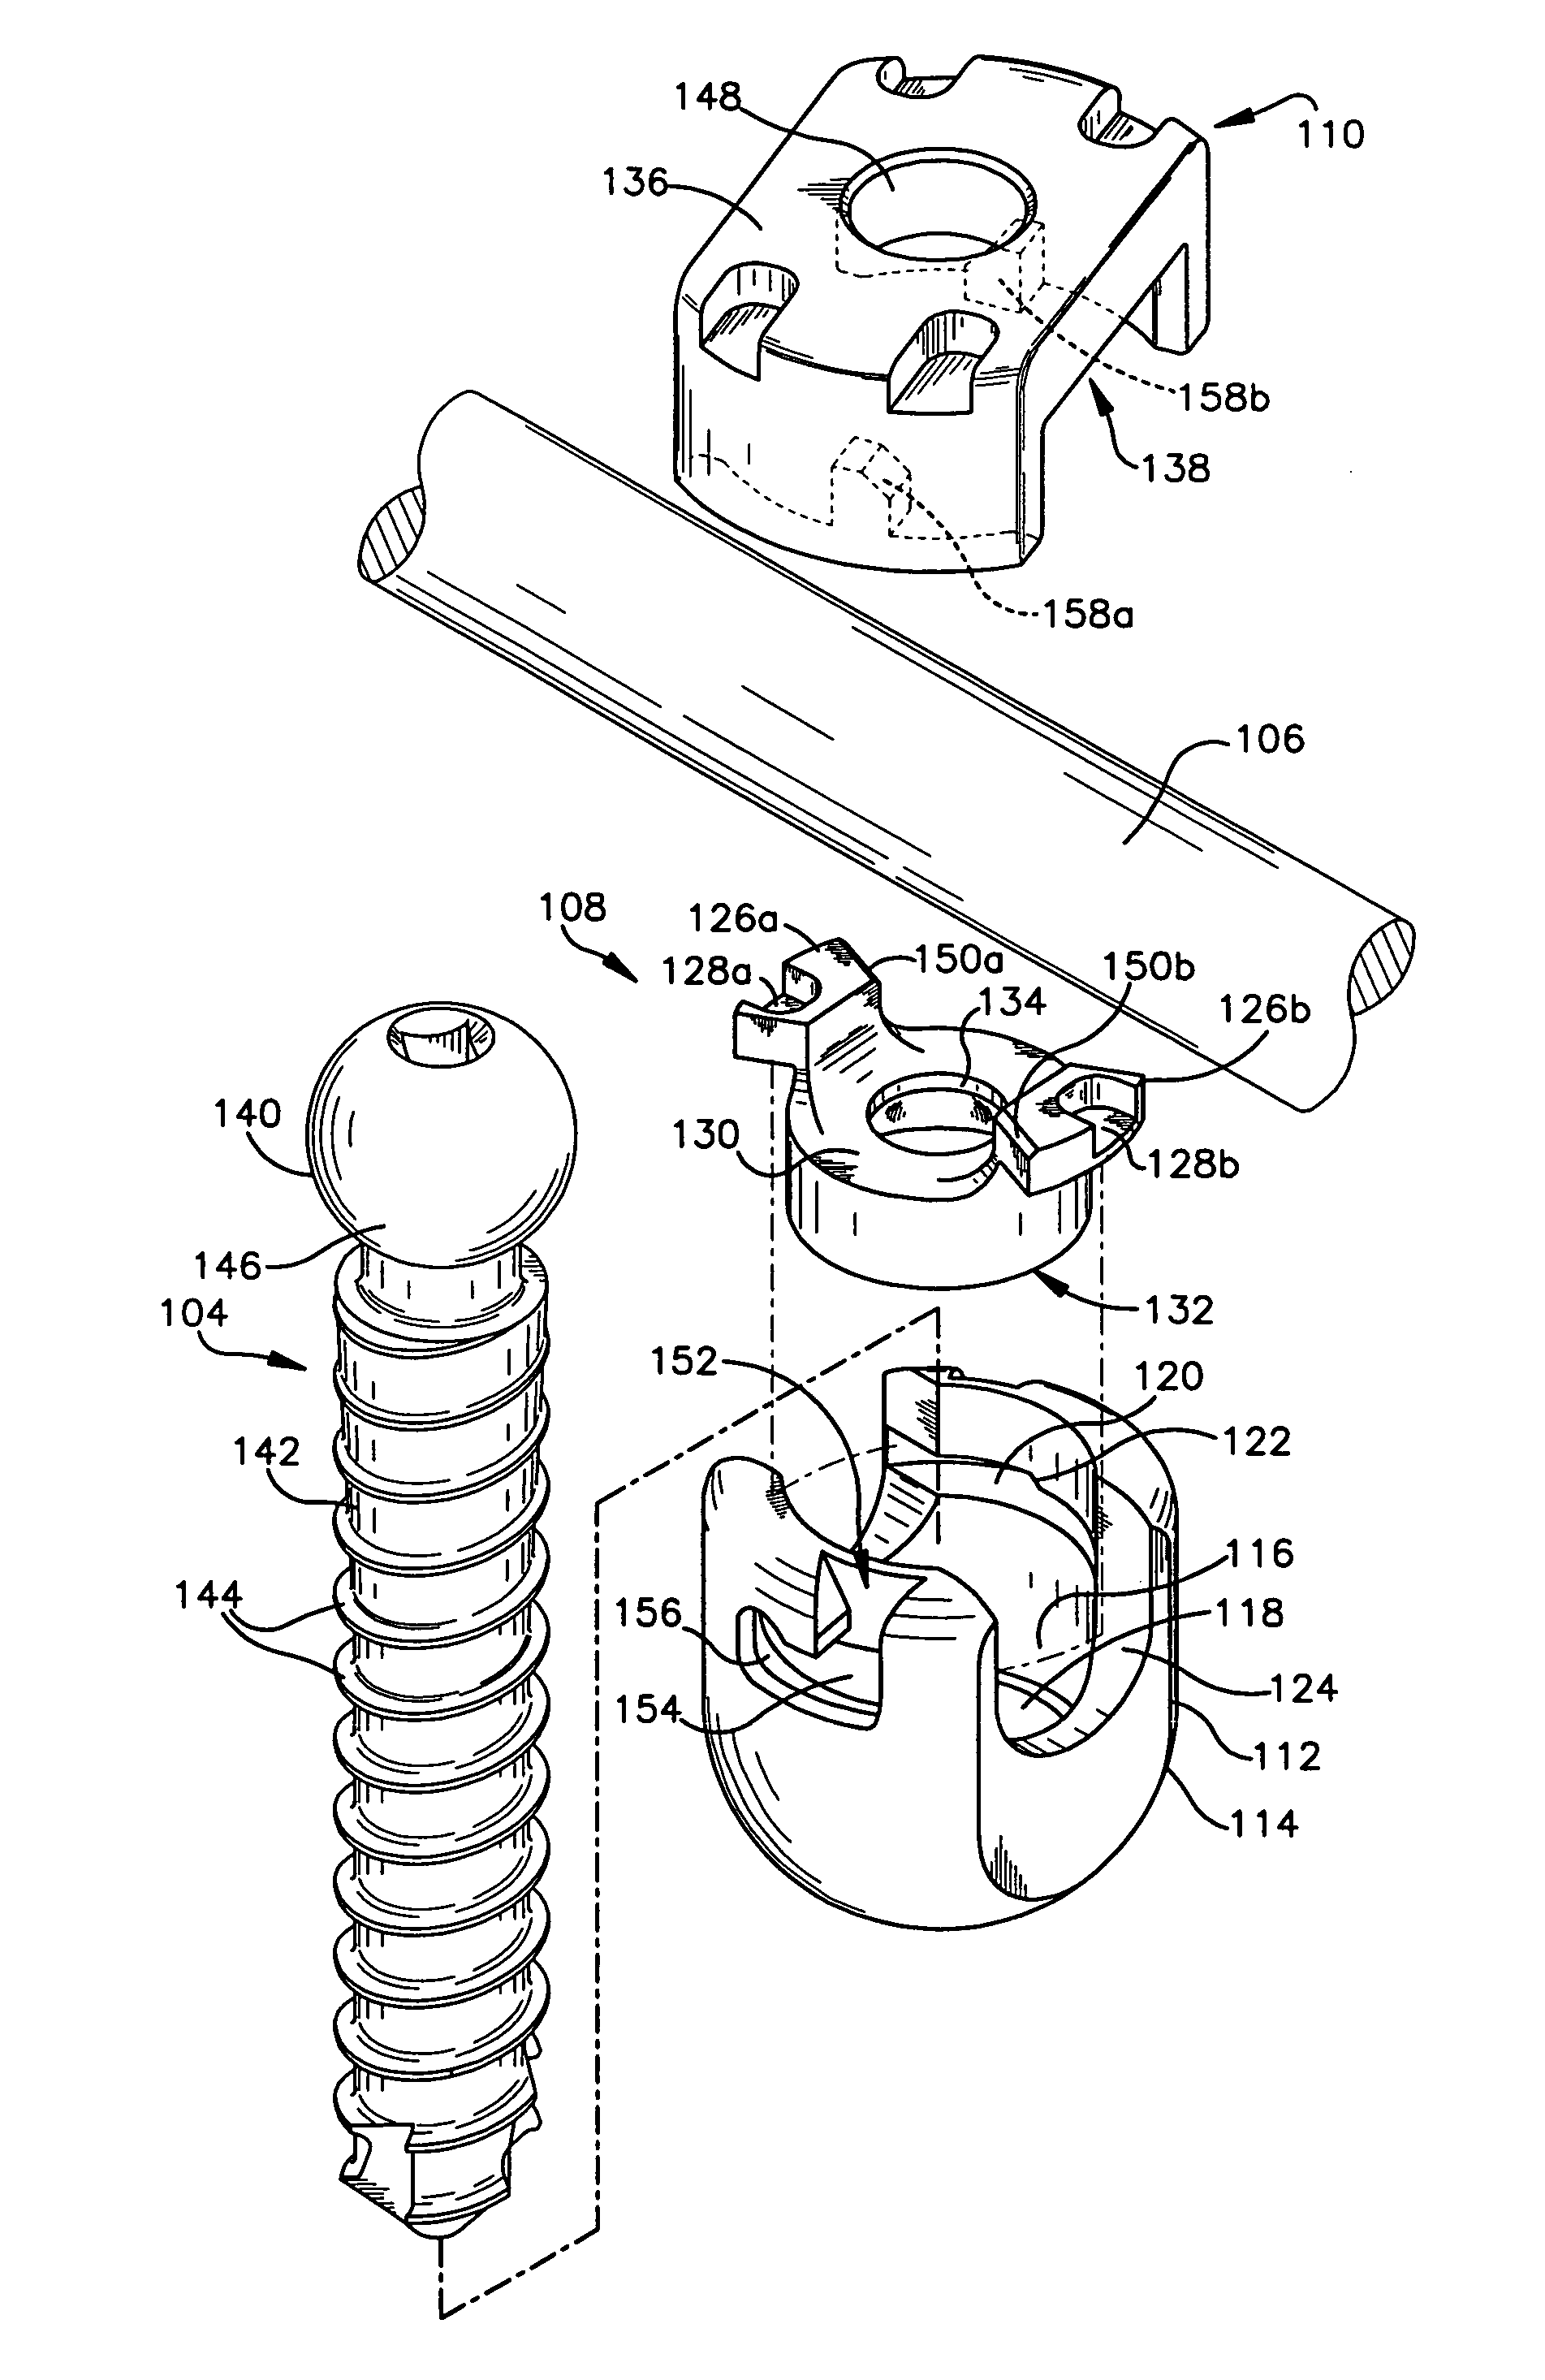 Multistage spinal fixation locking mechanism